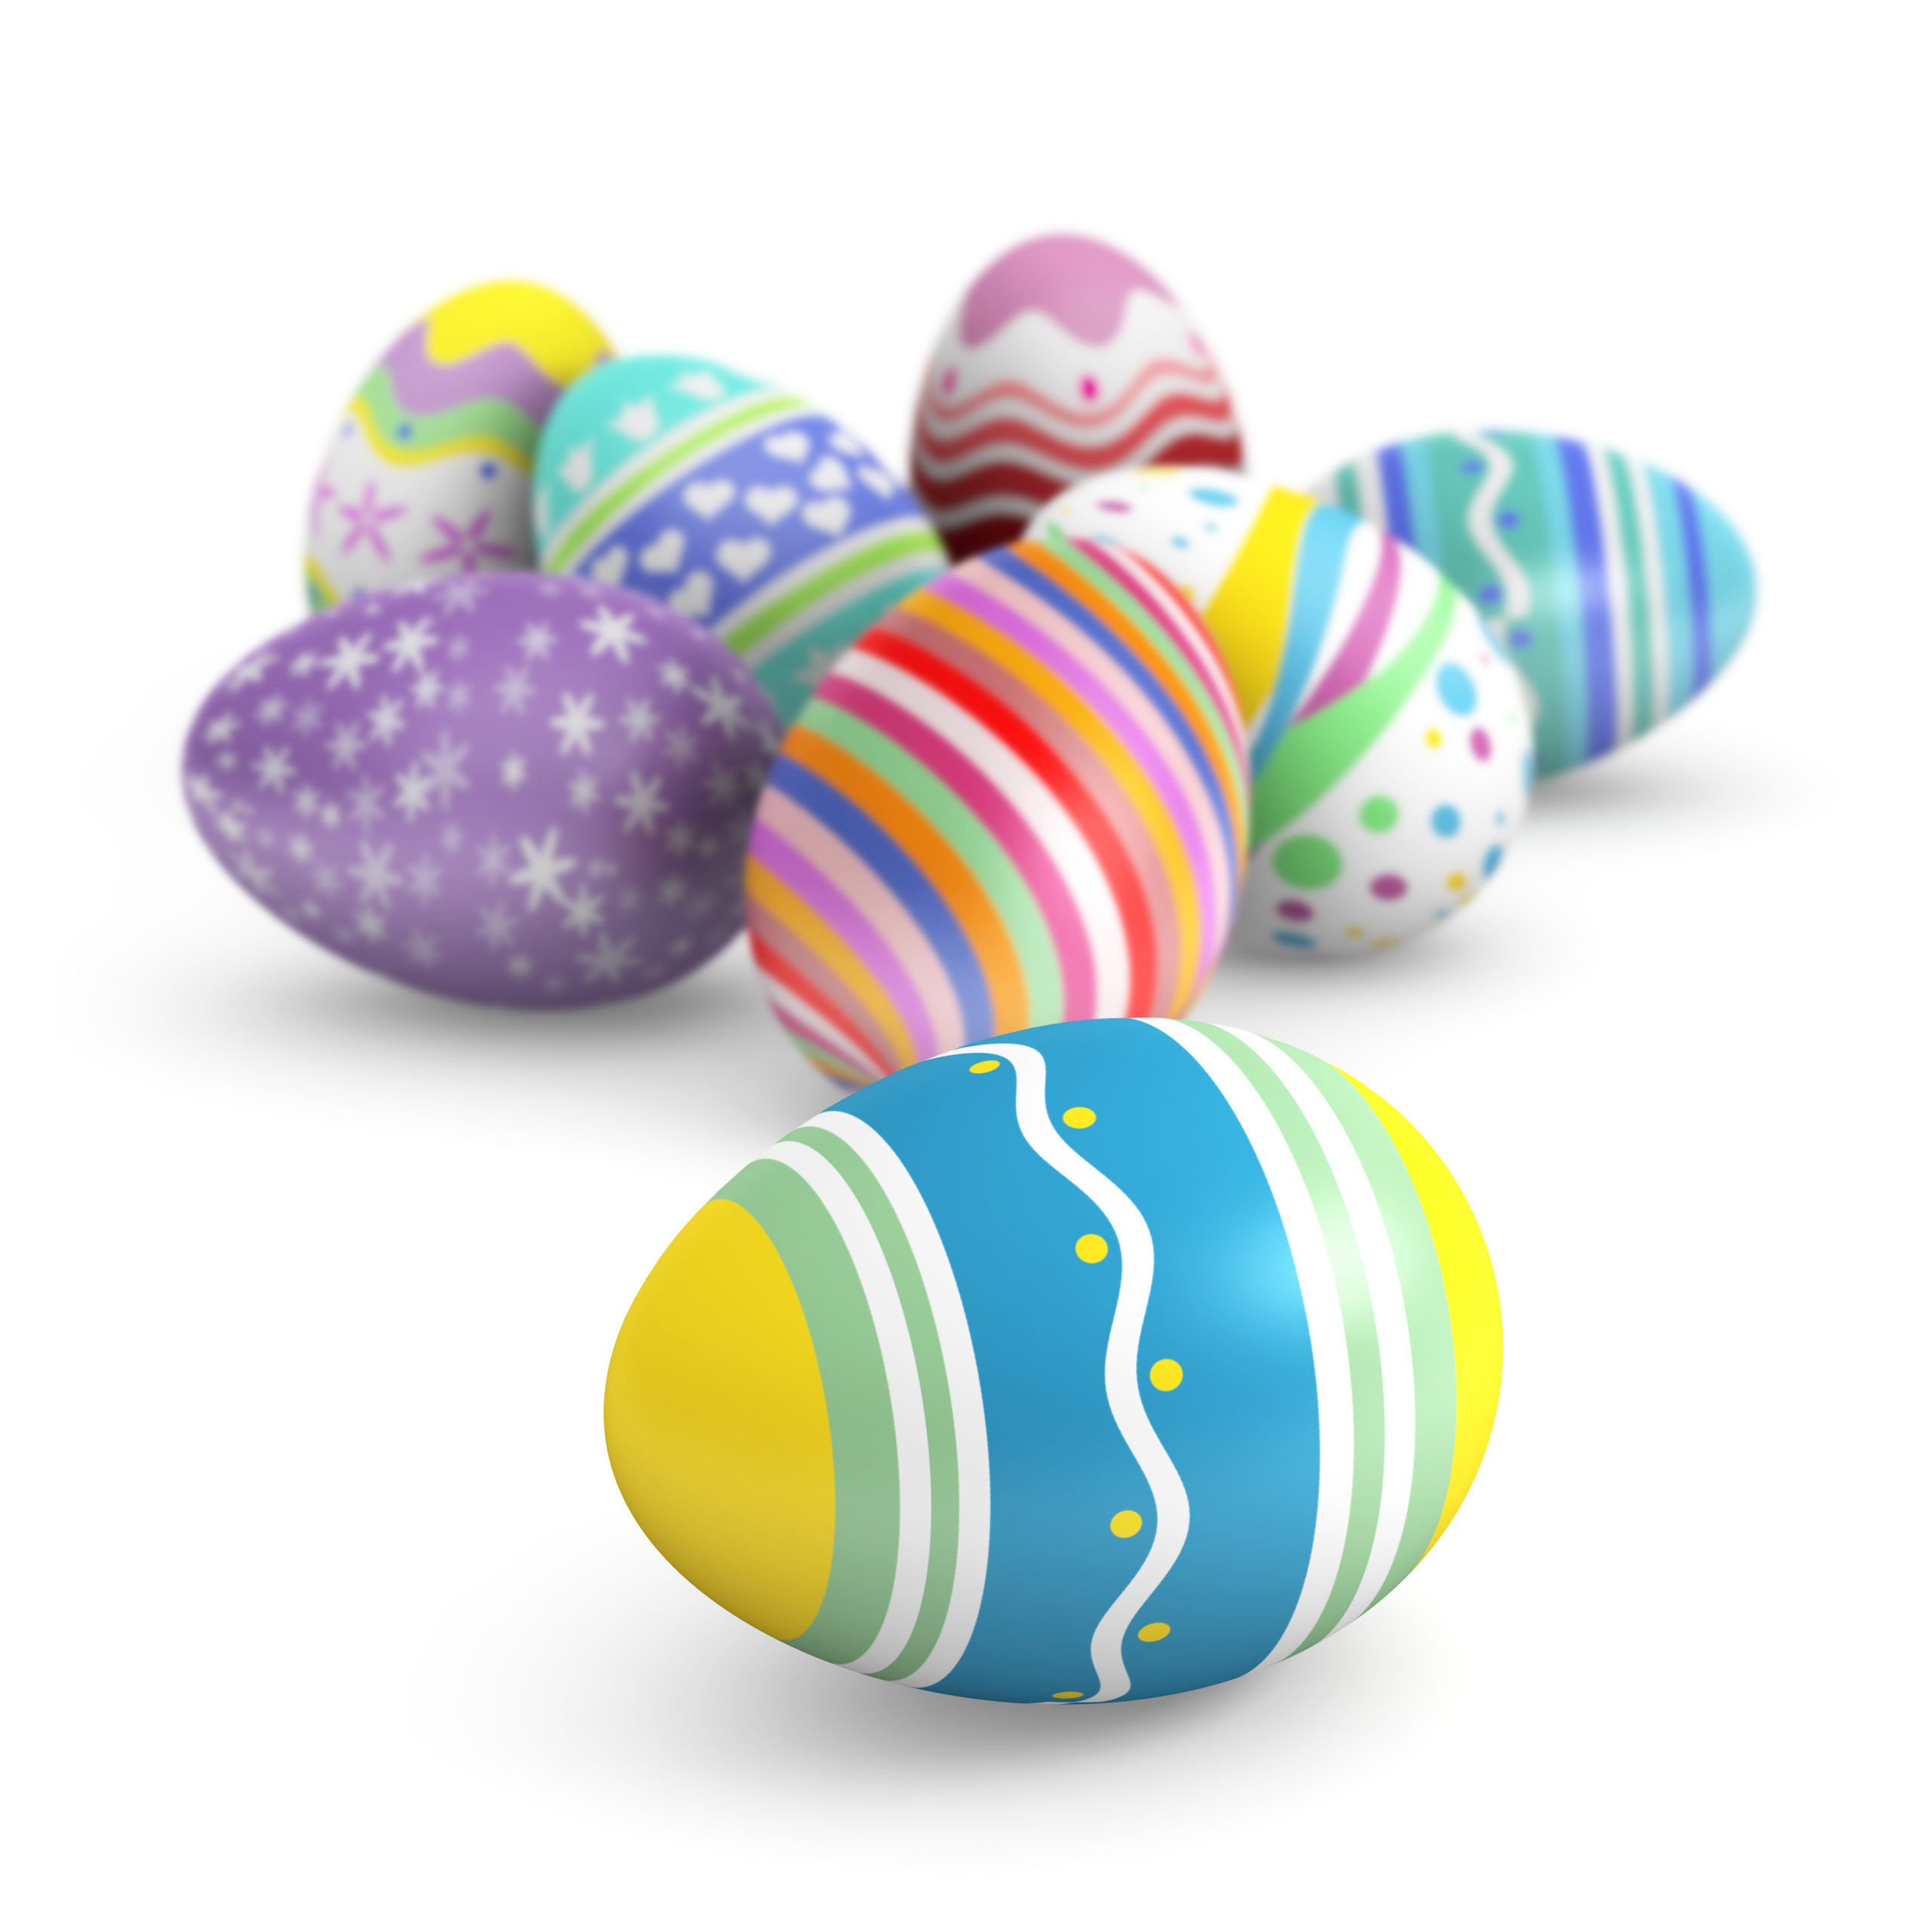 <h1 class="tribe-events-single-event-title">Orinda: Spring Egg Hunt</h1>